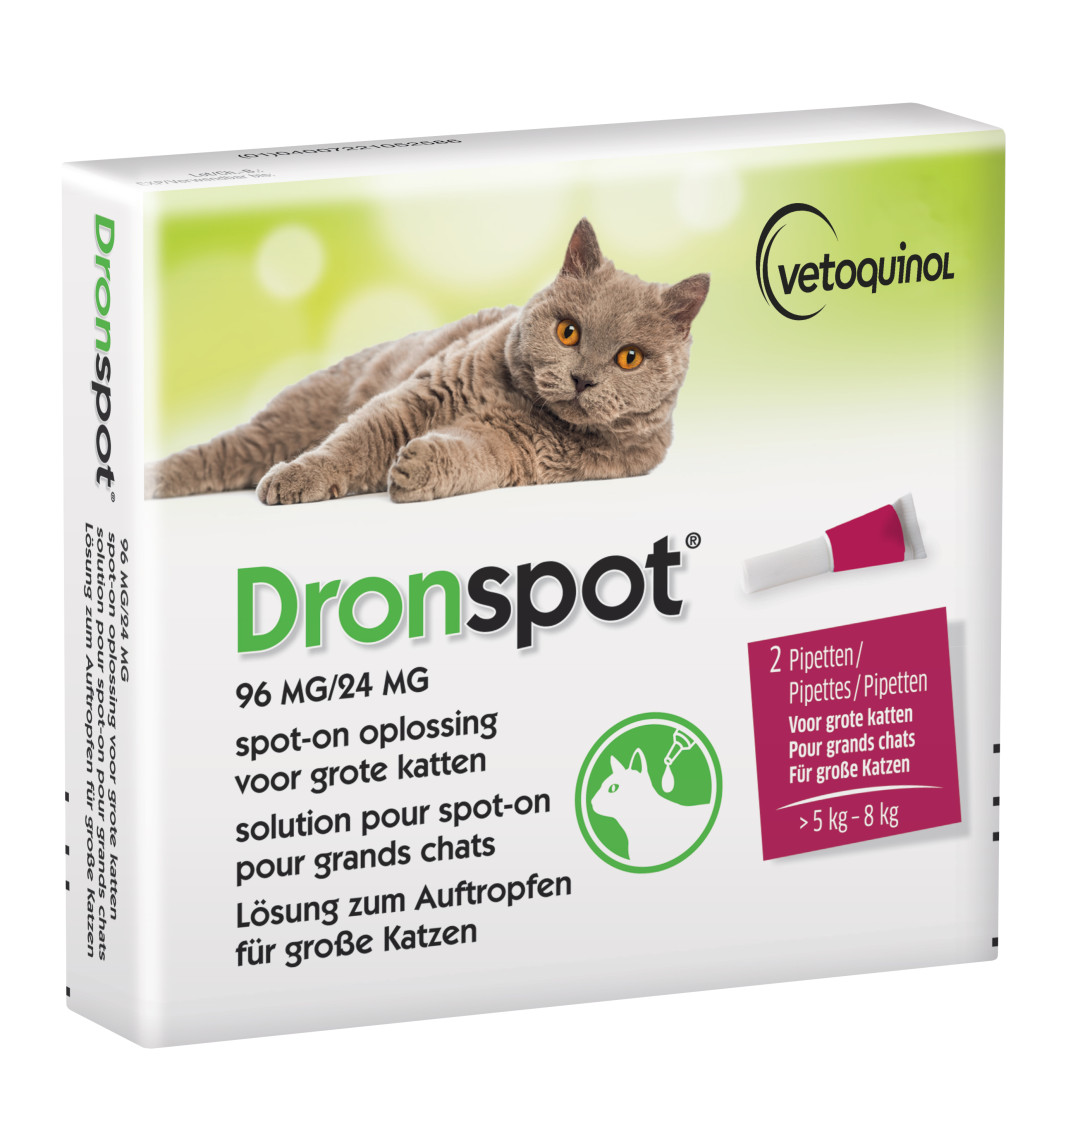 Dronspot spot-on ontwormingspipet kat 5 - 8 kg